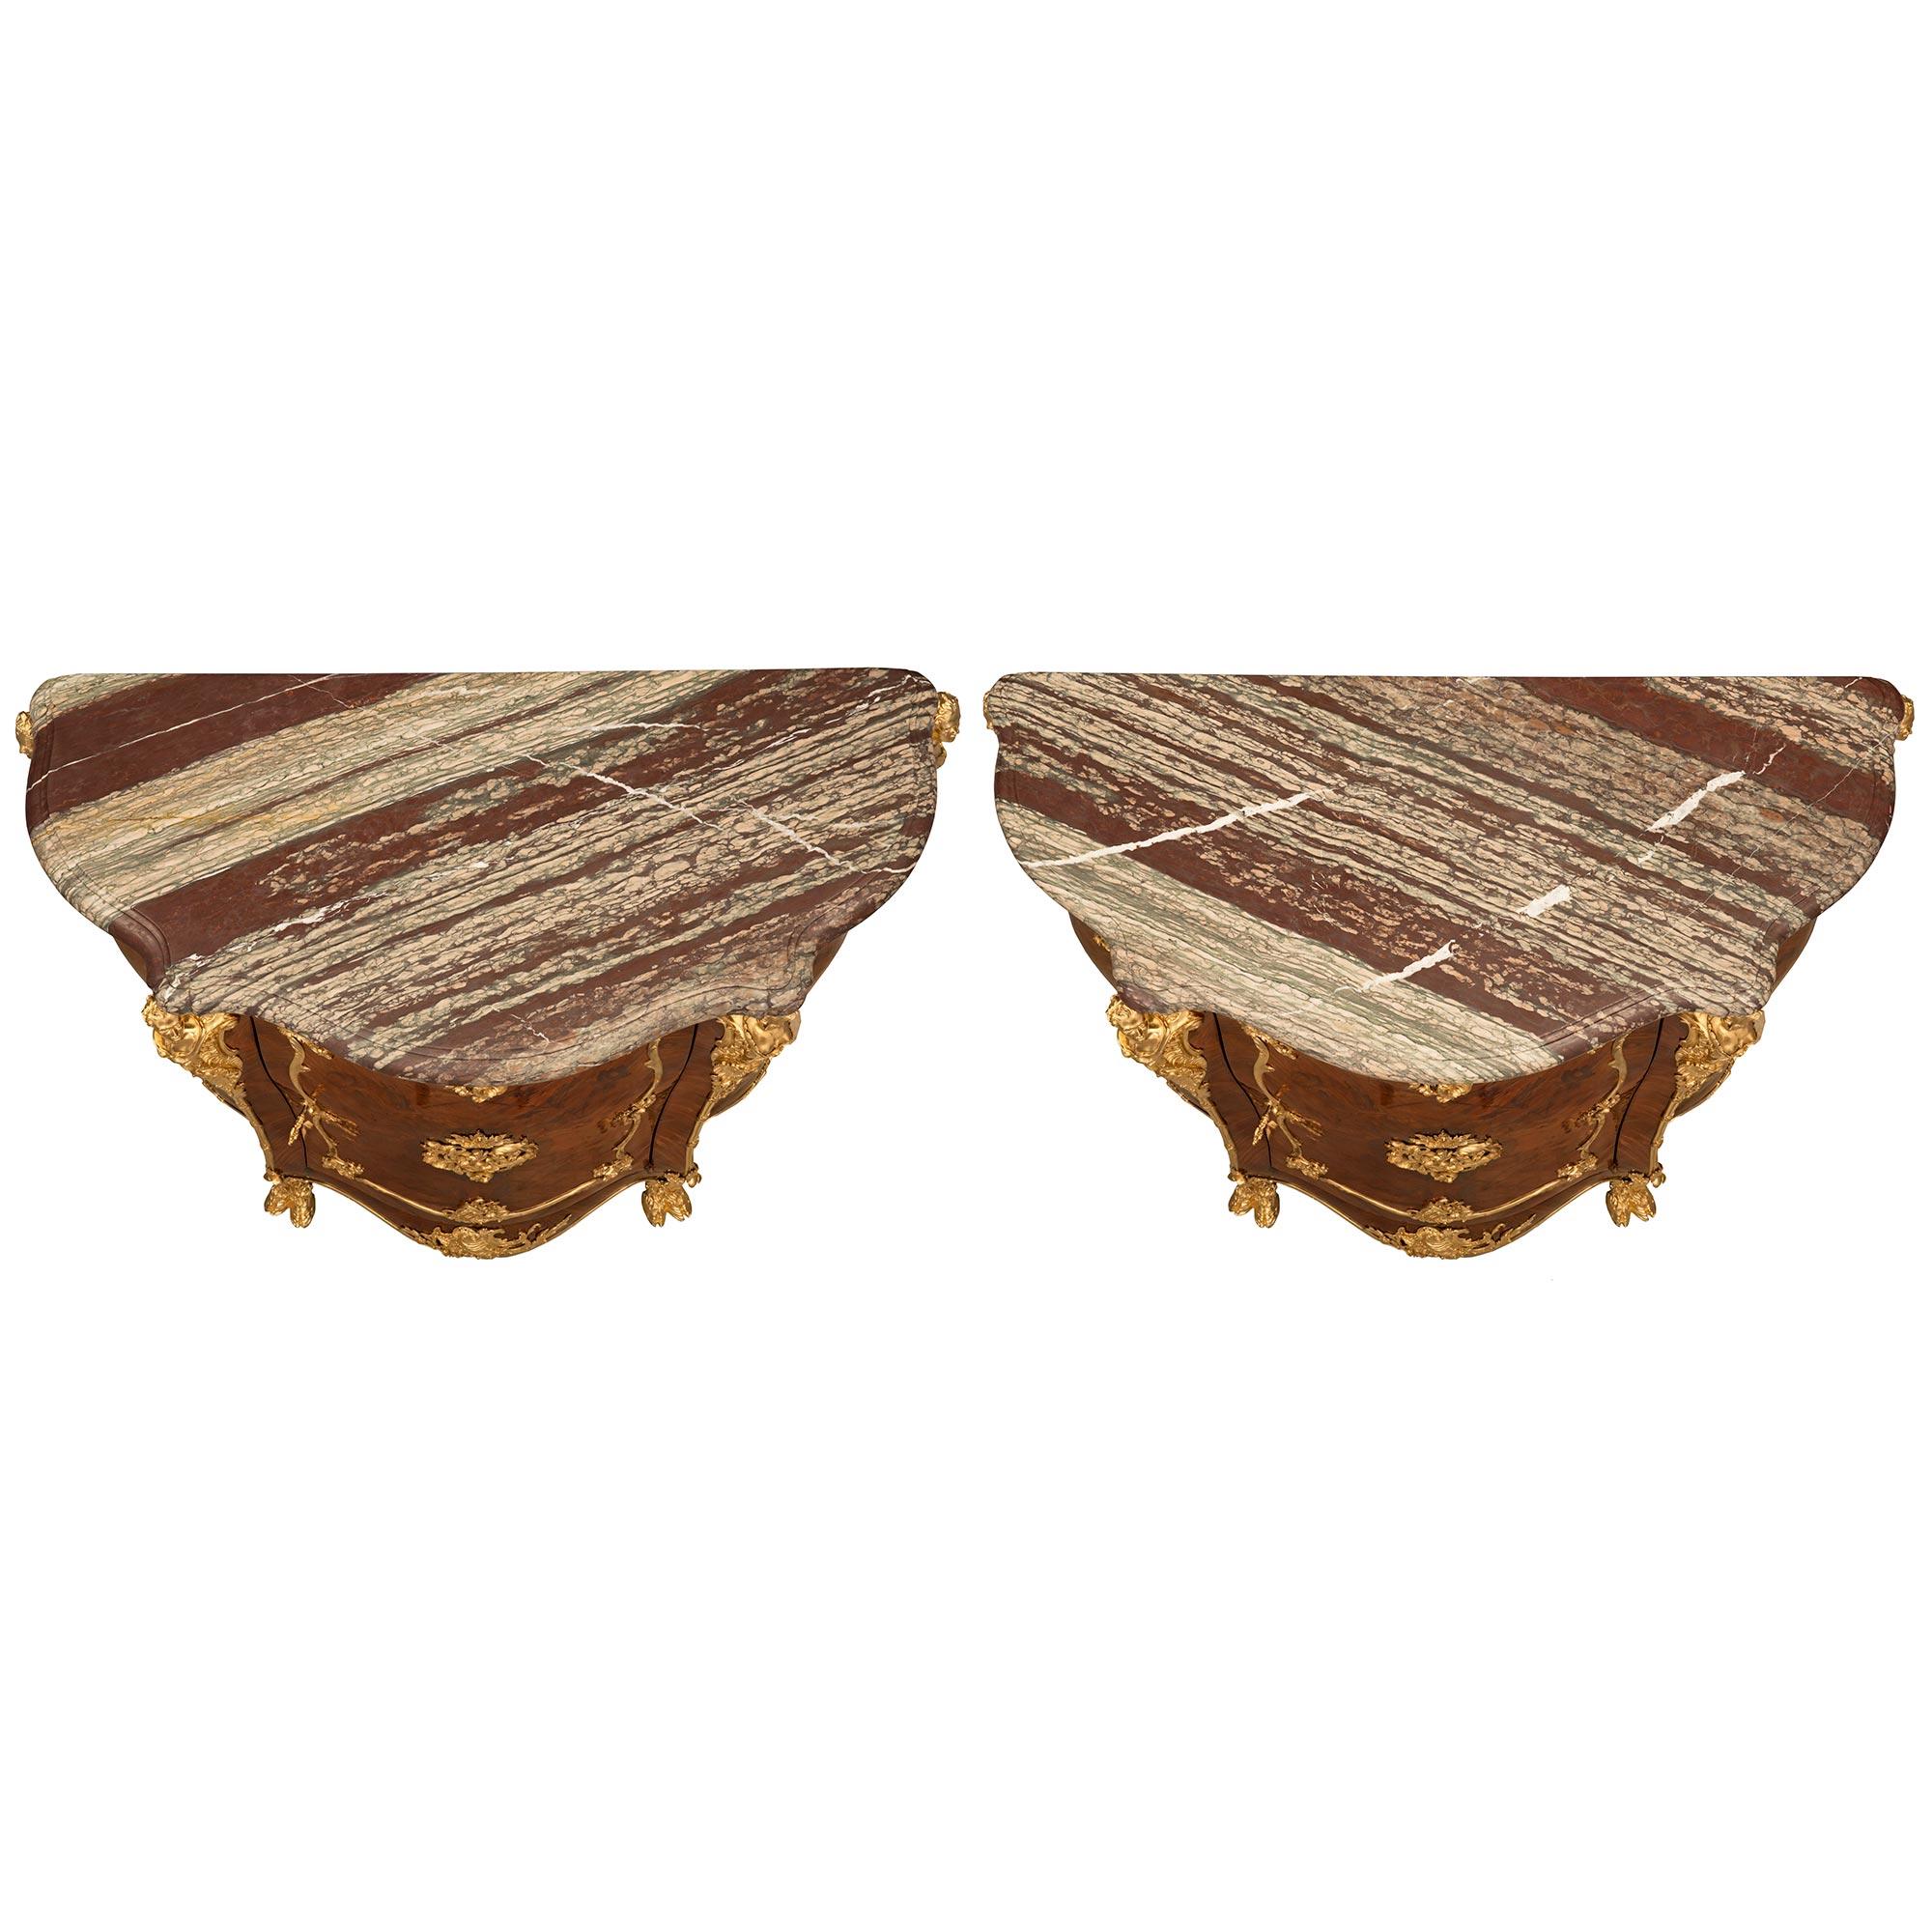 A sensational and extremely high quality pair of French 19th century Louis XV st. Belle Époque period Kingwood, Tulipwood, ormolu, and Campan Rubané marble cabinets attributed to Joseph-Emmanuel Zwiener. Each cabinet is raised by impressive and very